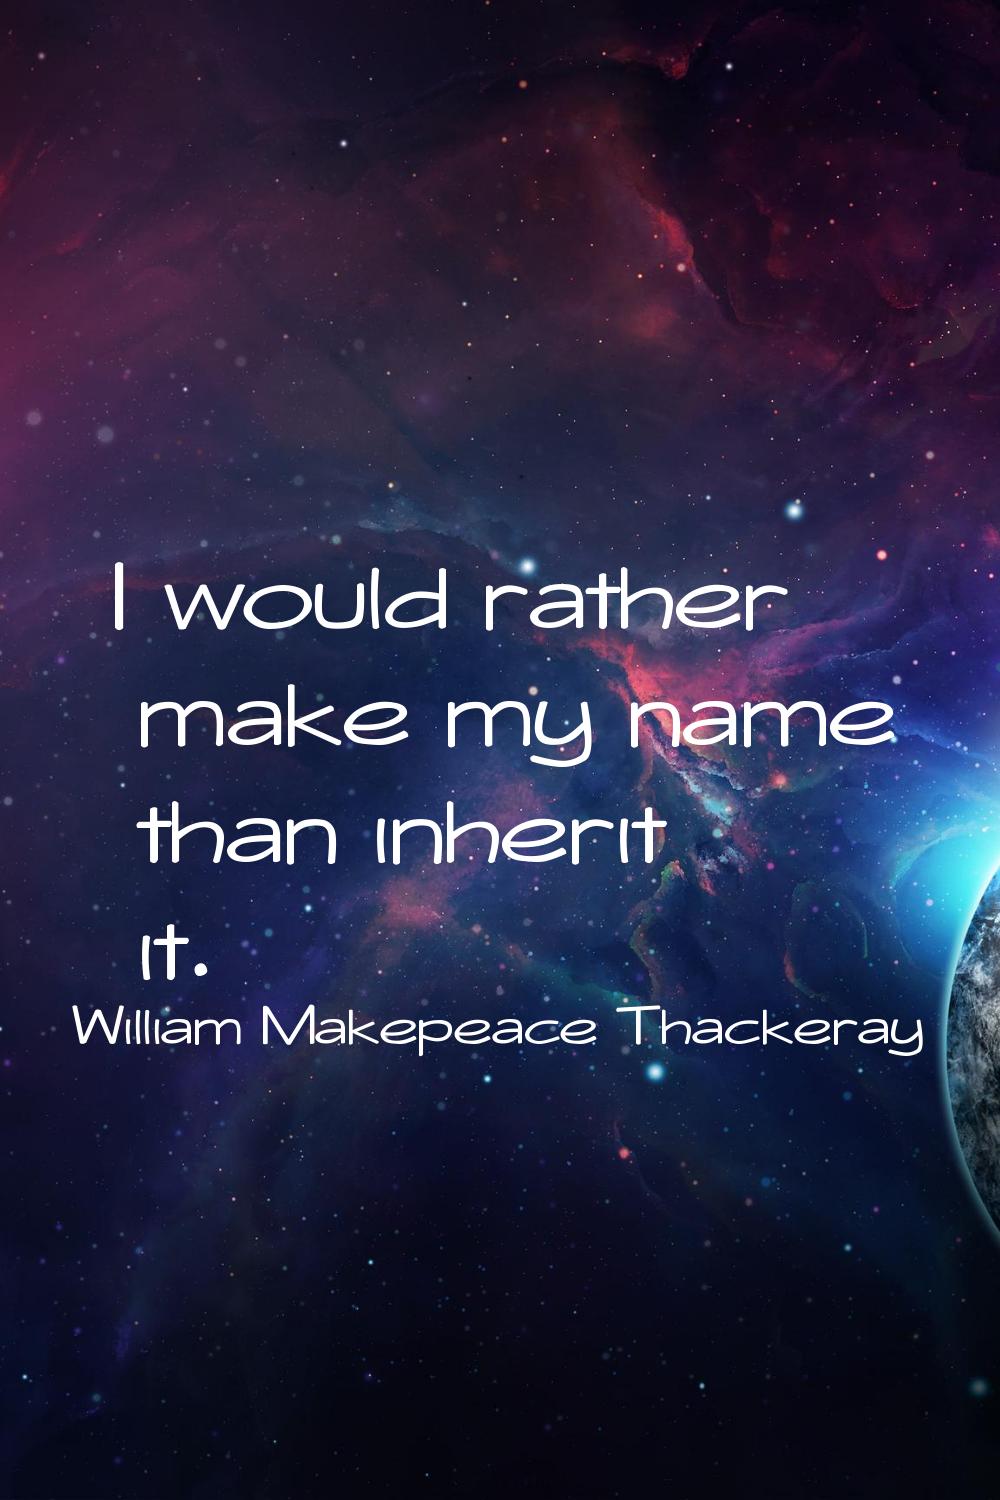 I would rather make my name than inherit it.